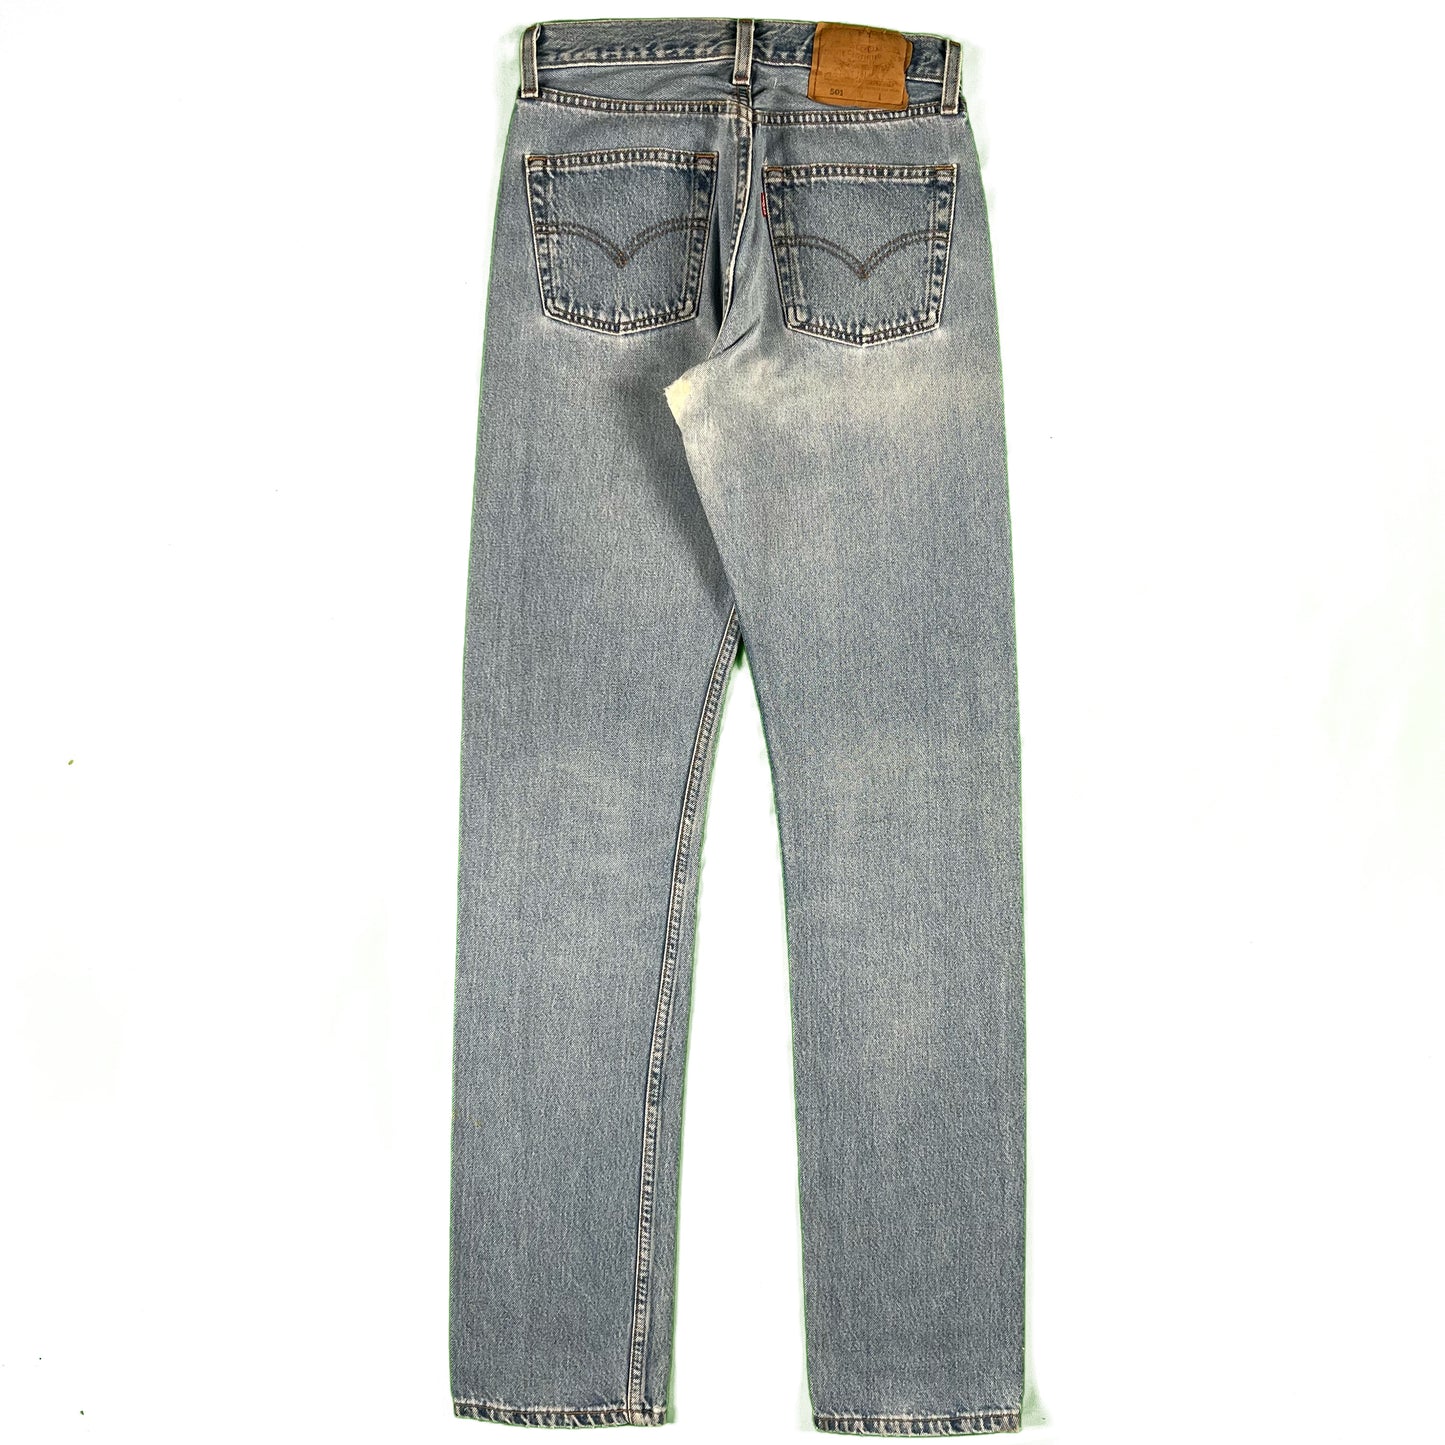 90s Levi's 501 2 Pack-(26/27x33.5)